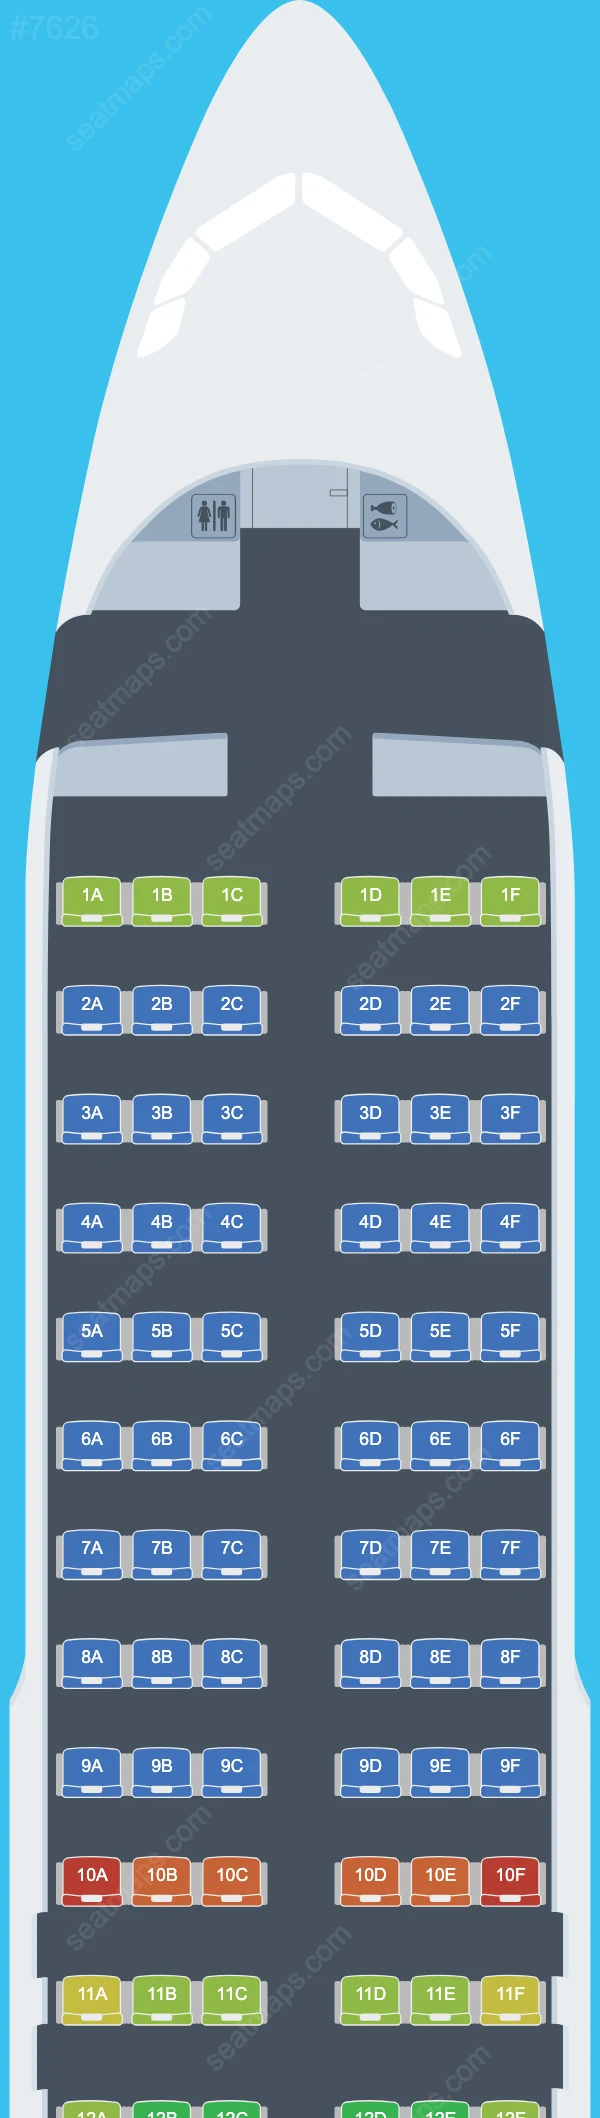 Eurowings Europe Airbus A320 Seat Maps A320-200 V.2